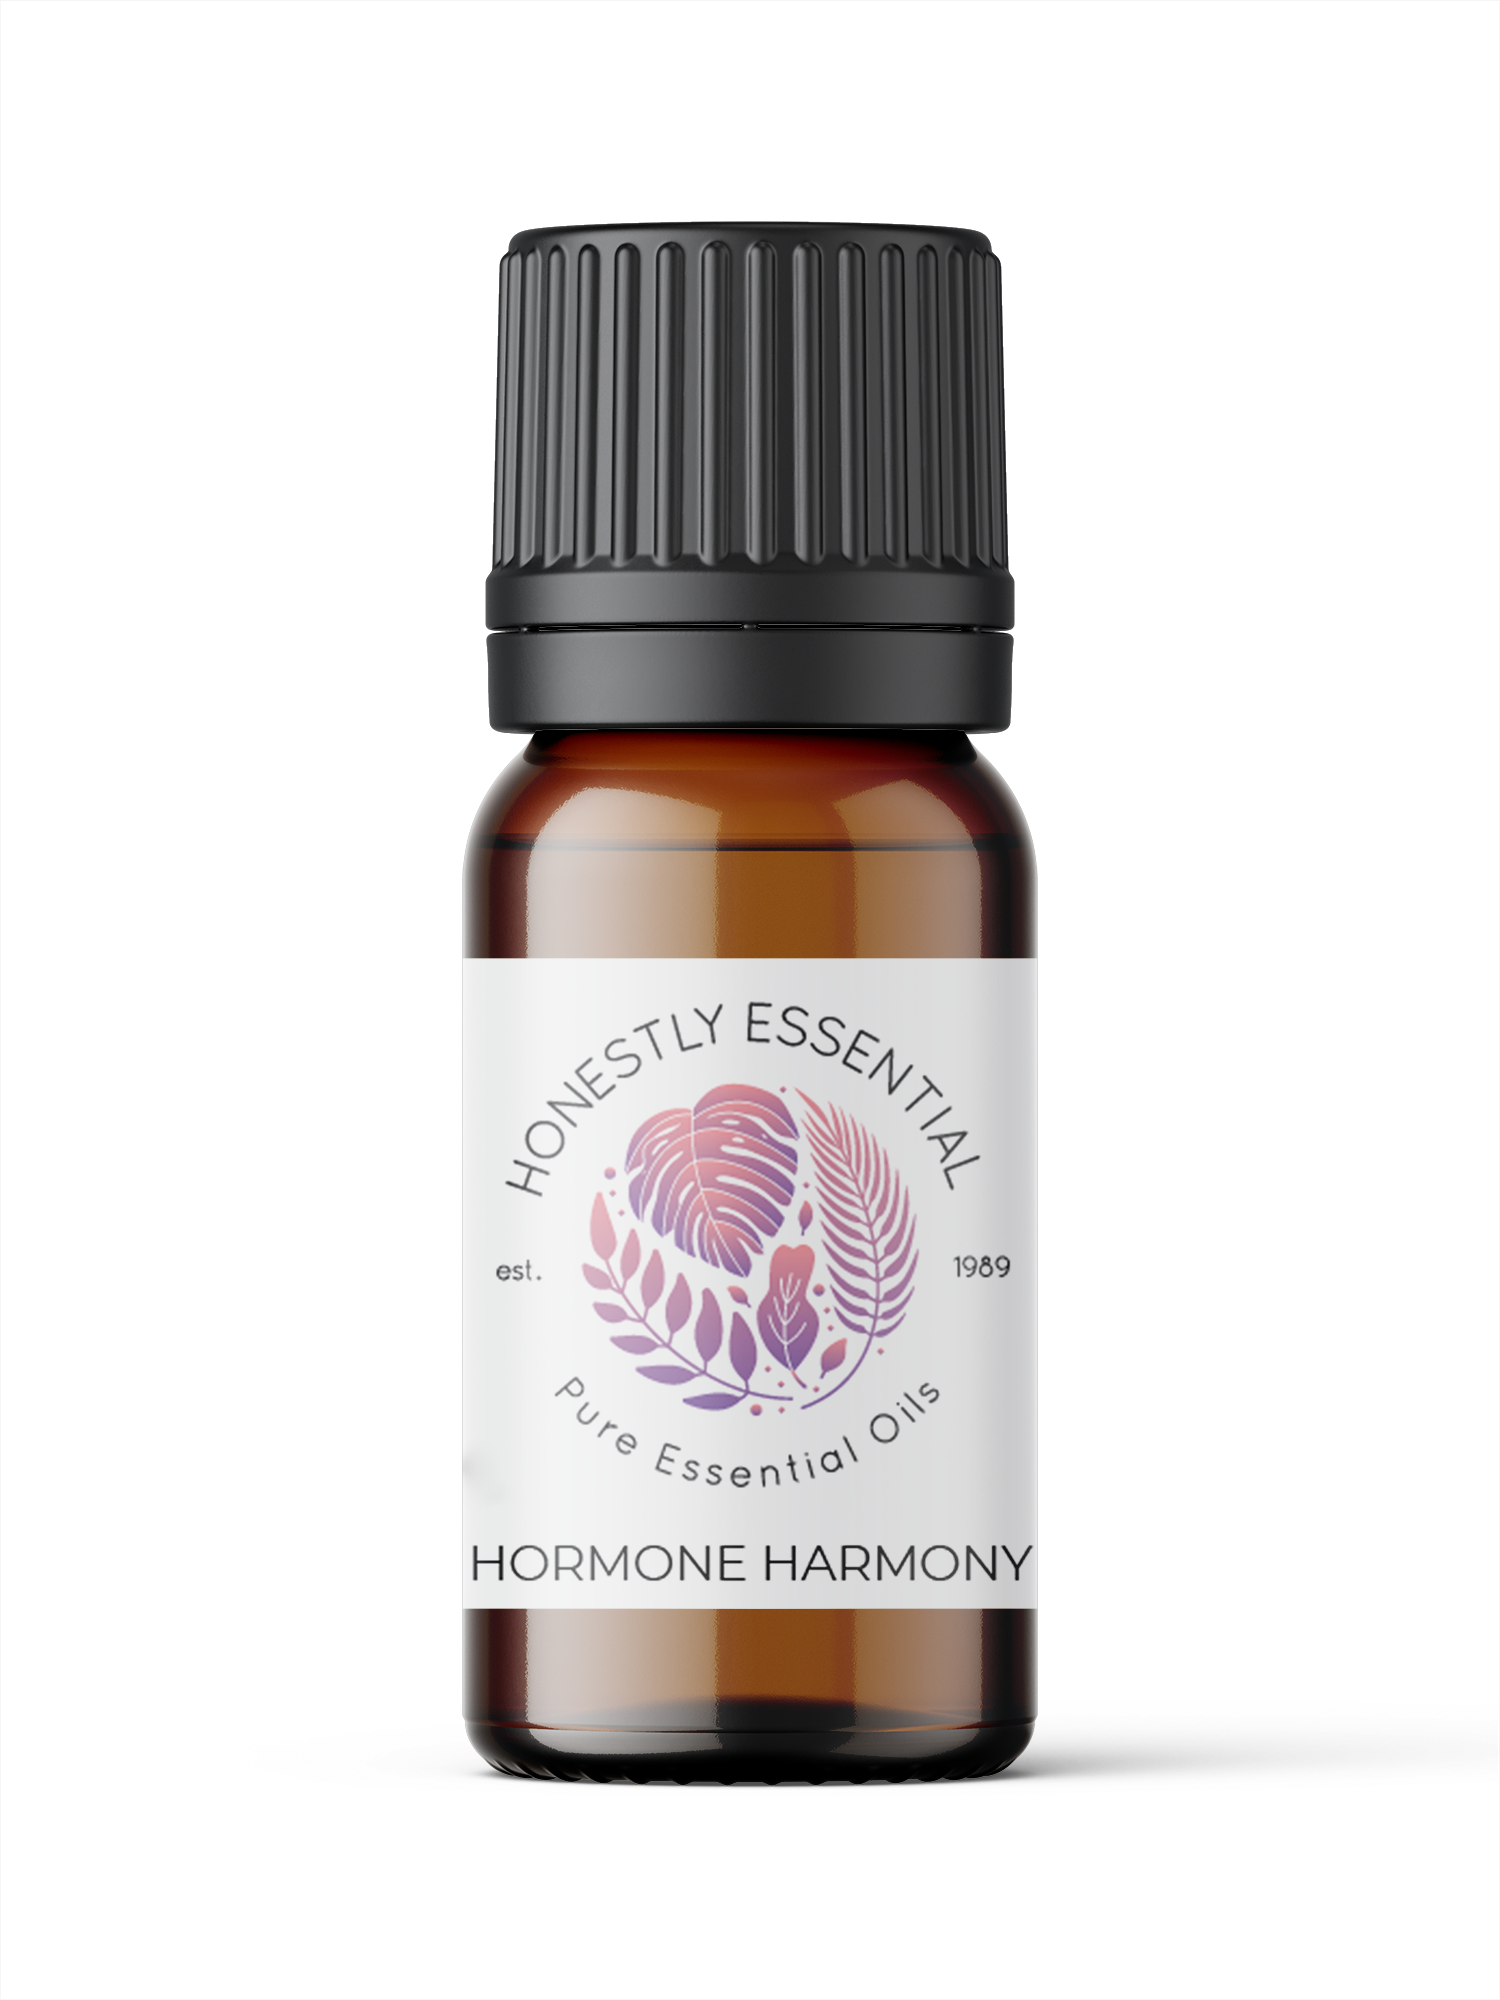 Hormone Harmony - Synergistic Blends | Honestly Essential Oils anxiety, depression, endocrine support, energy, hormonal imbalances, Hormone Support, hormones, reproductive imbalances, synergi